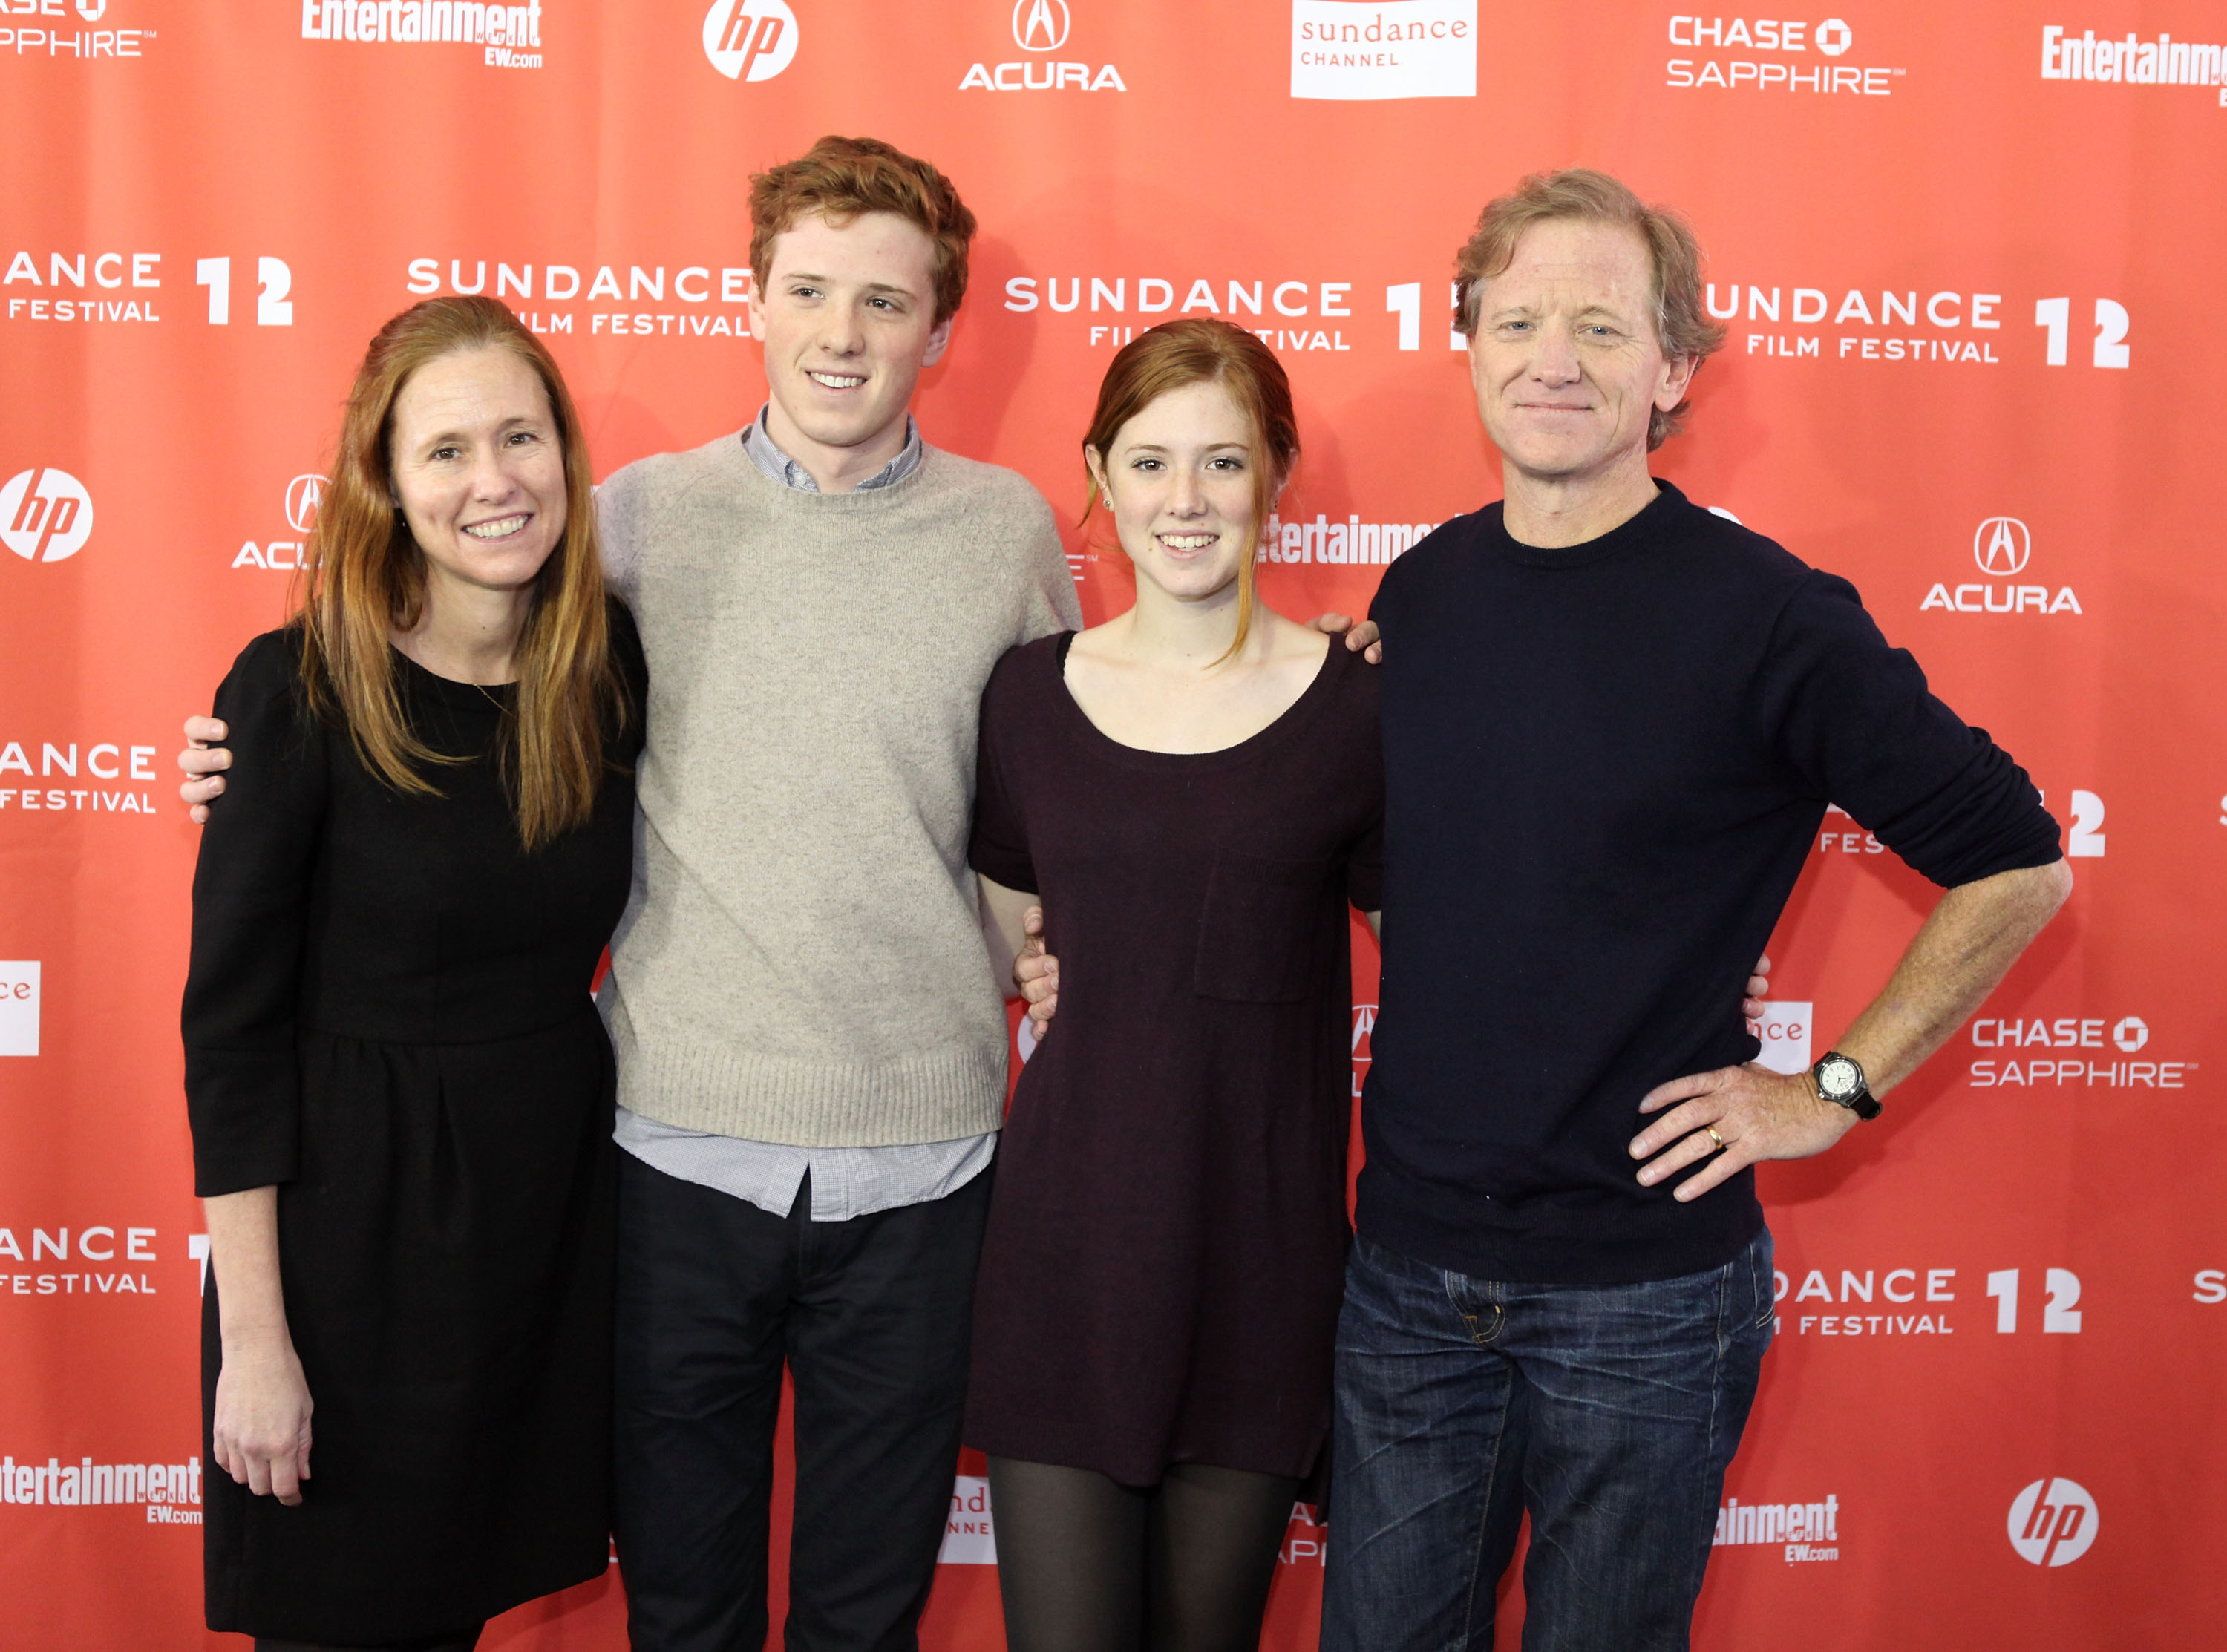 Kyle Redford, Dylan Redford, Lena Redford and filmmaker James Redford at Library Center Theater on January 23, 2012 in Park City, Utah. | Source: Getty Images